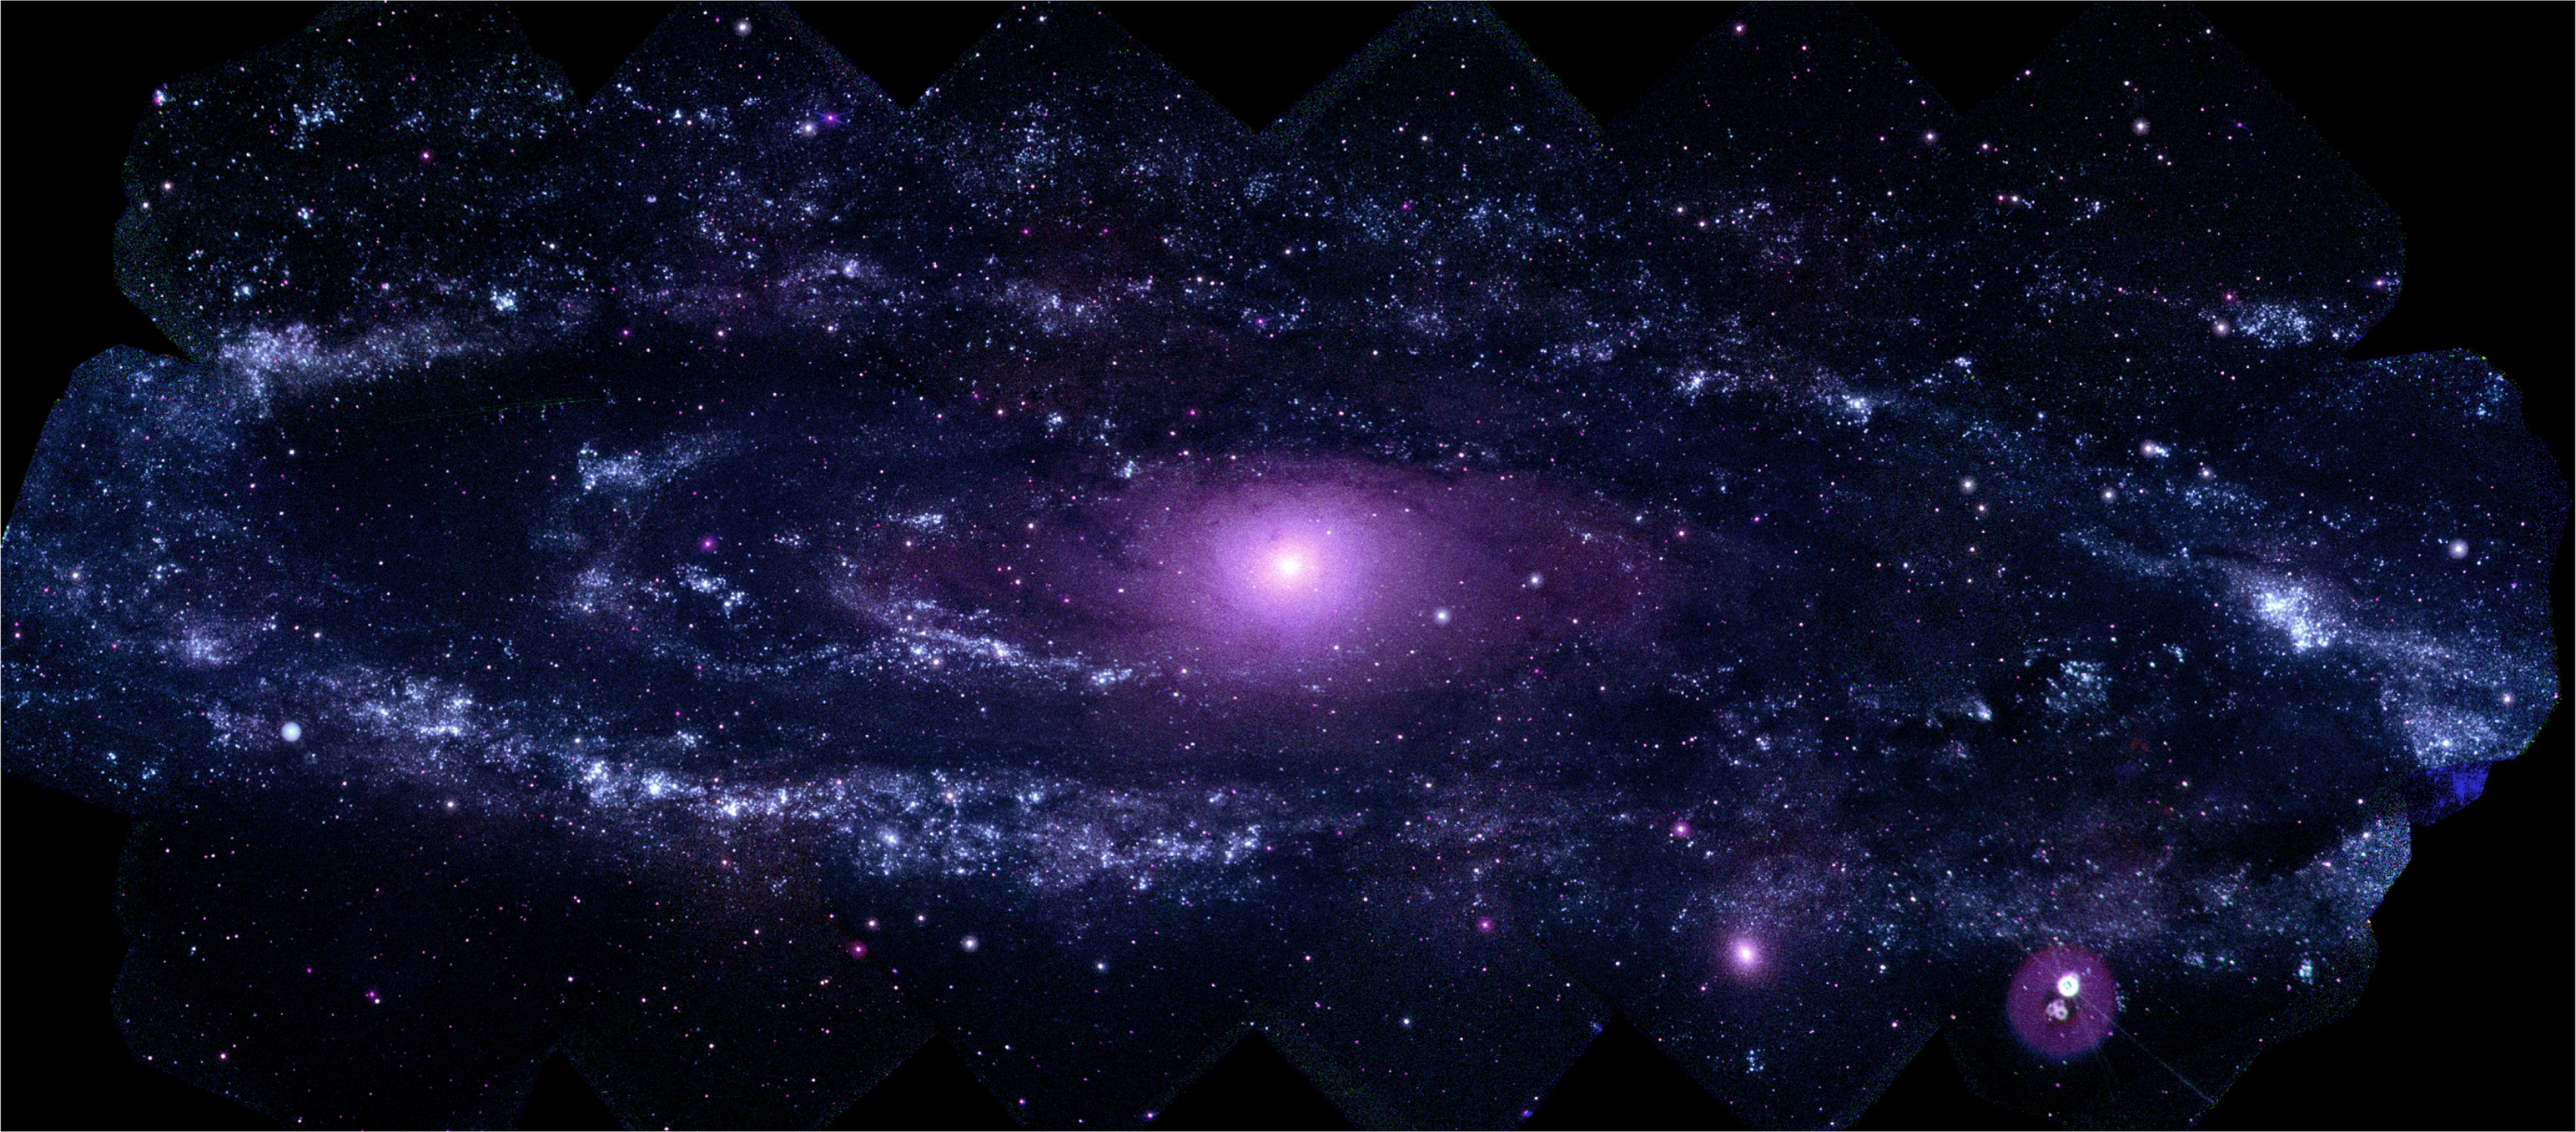 This Stunning Vista Represents The Highest Resolution Image Ever Made Of The Andromeda Galaxy Aka M31 Andromeda Galaxy Hubble Space Telescope Pictures Nebula